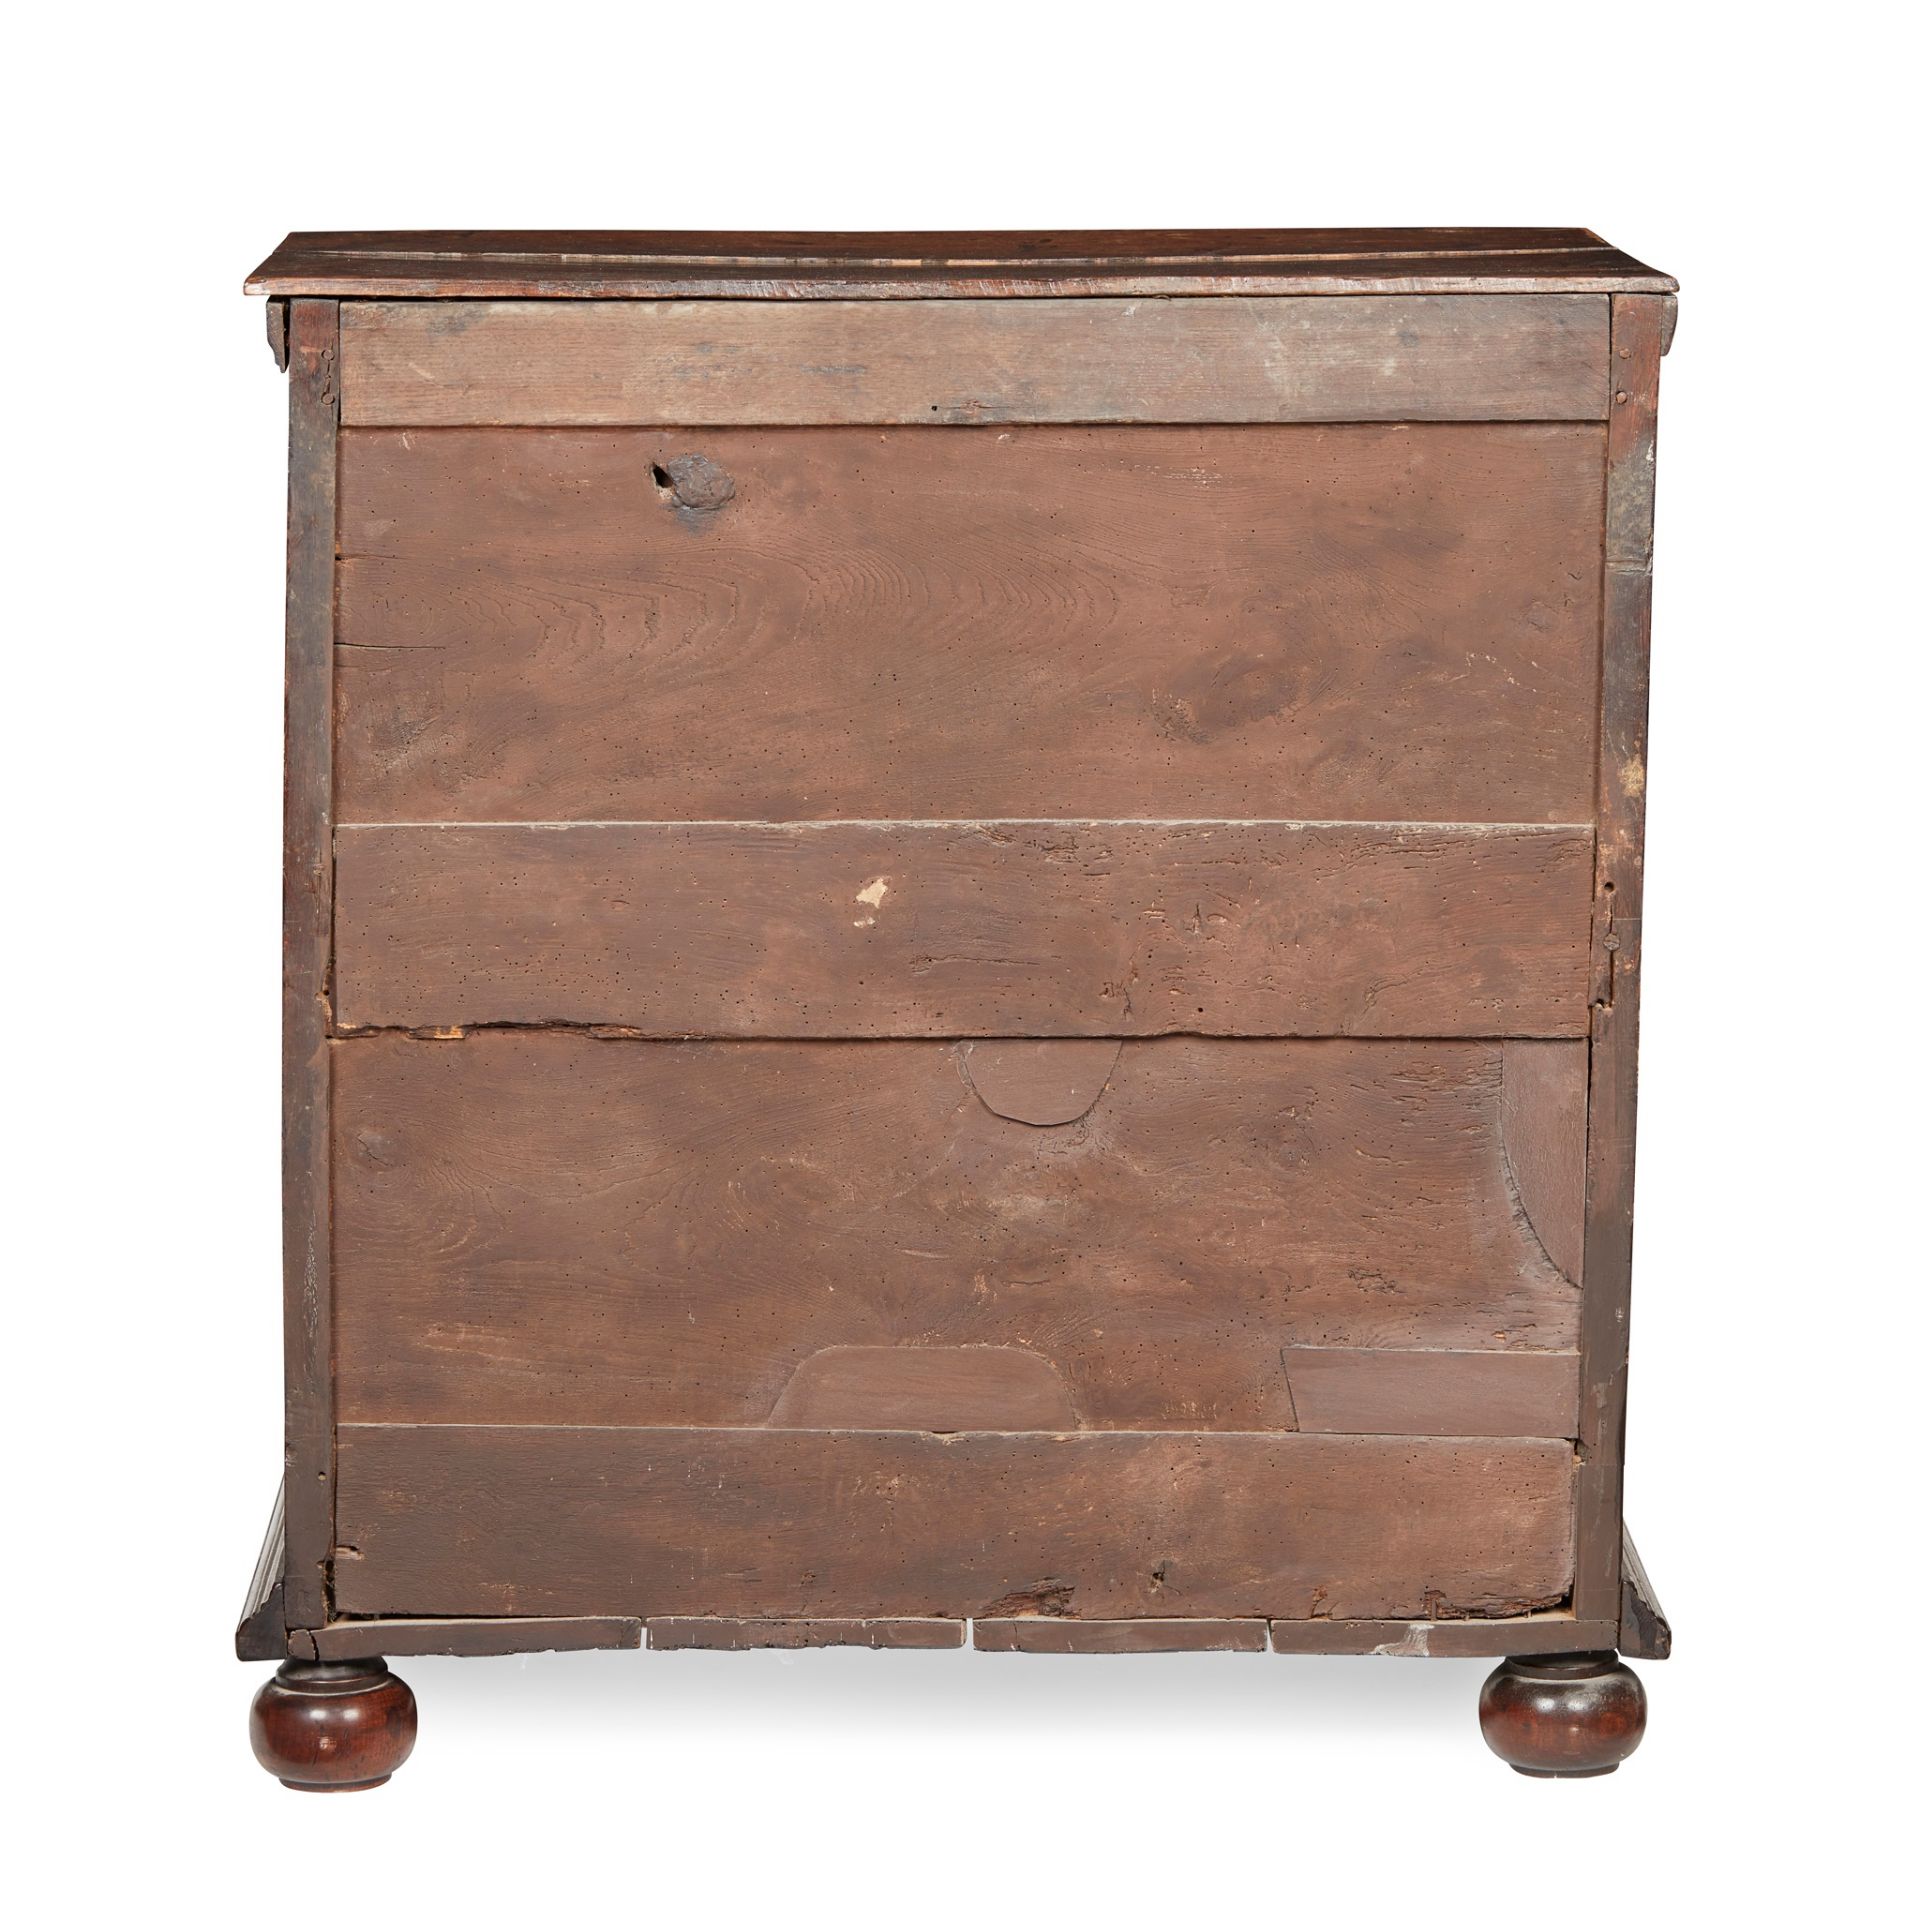 CHARLES II OAK CHEST OF DRAWERS 17TH CENTURY - Image 2 of 2